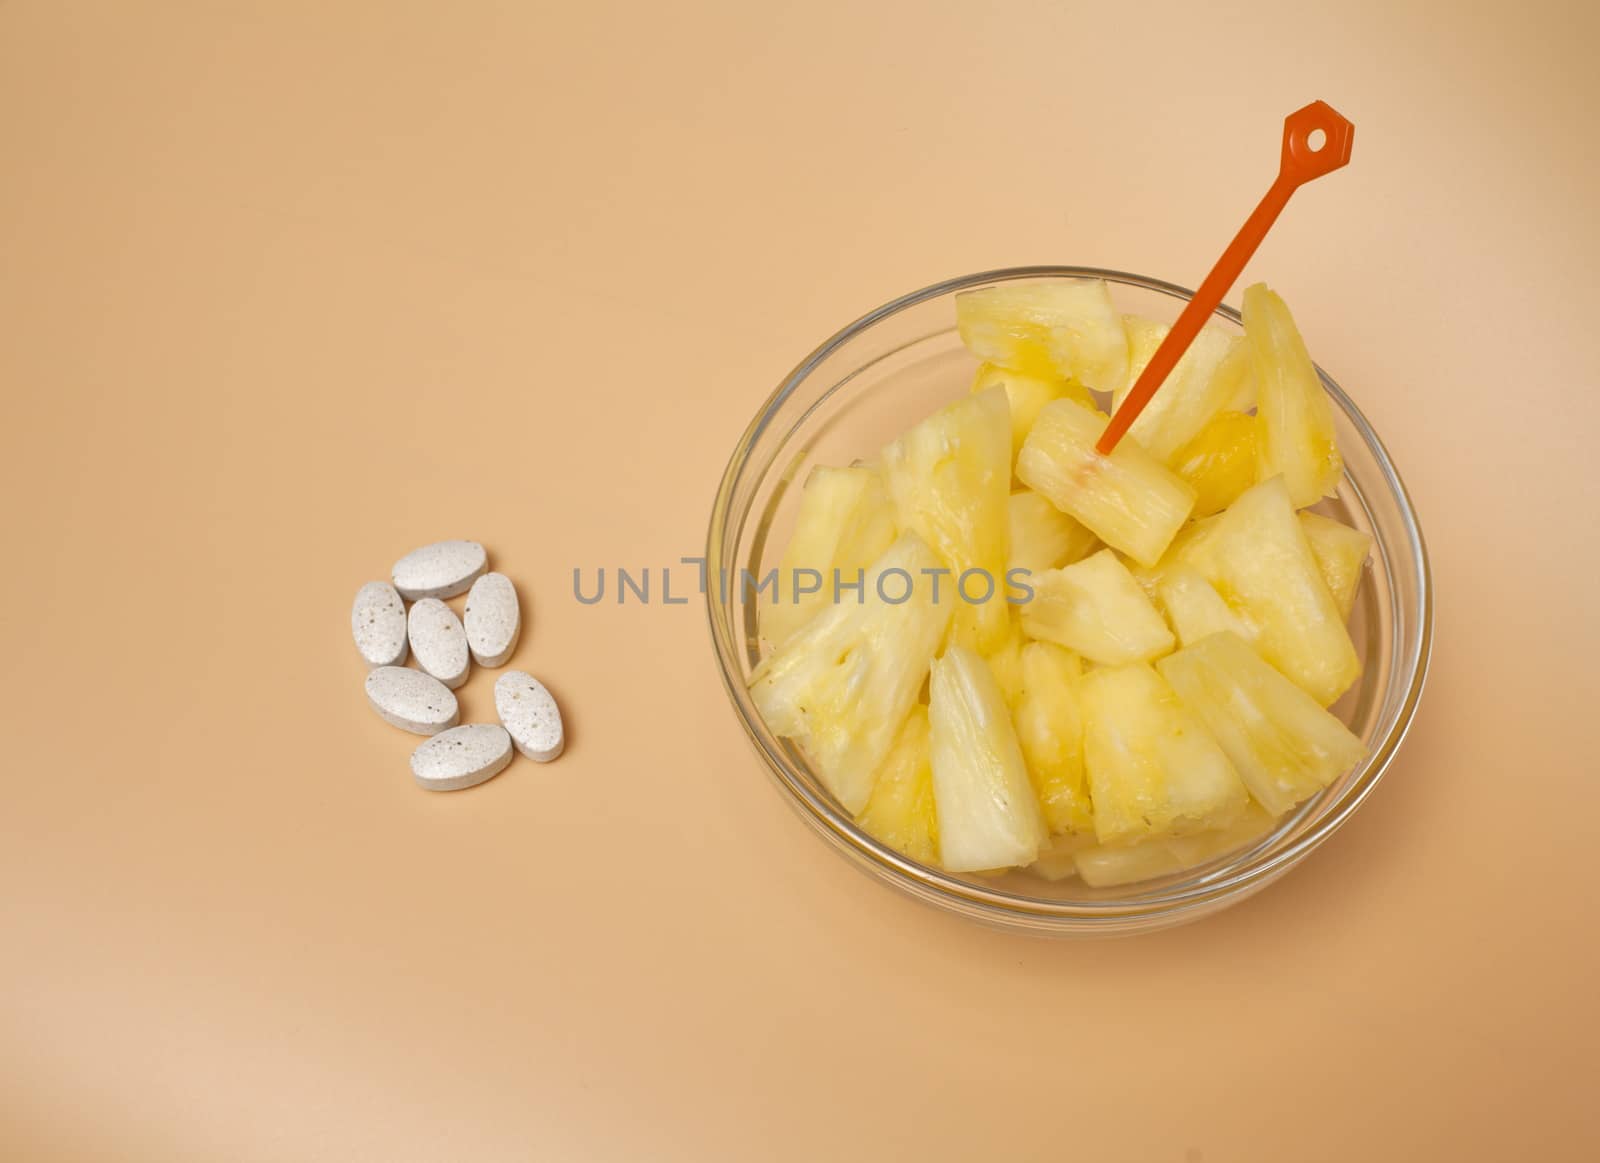 handful of pilule and cup filled with pineapple slices overhead view,  concept of healthy nutrition and prevention medicine